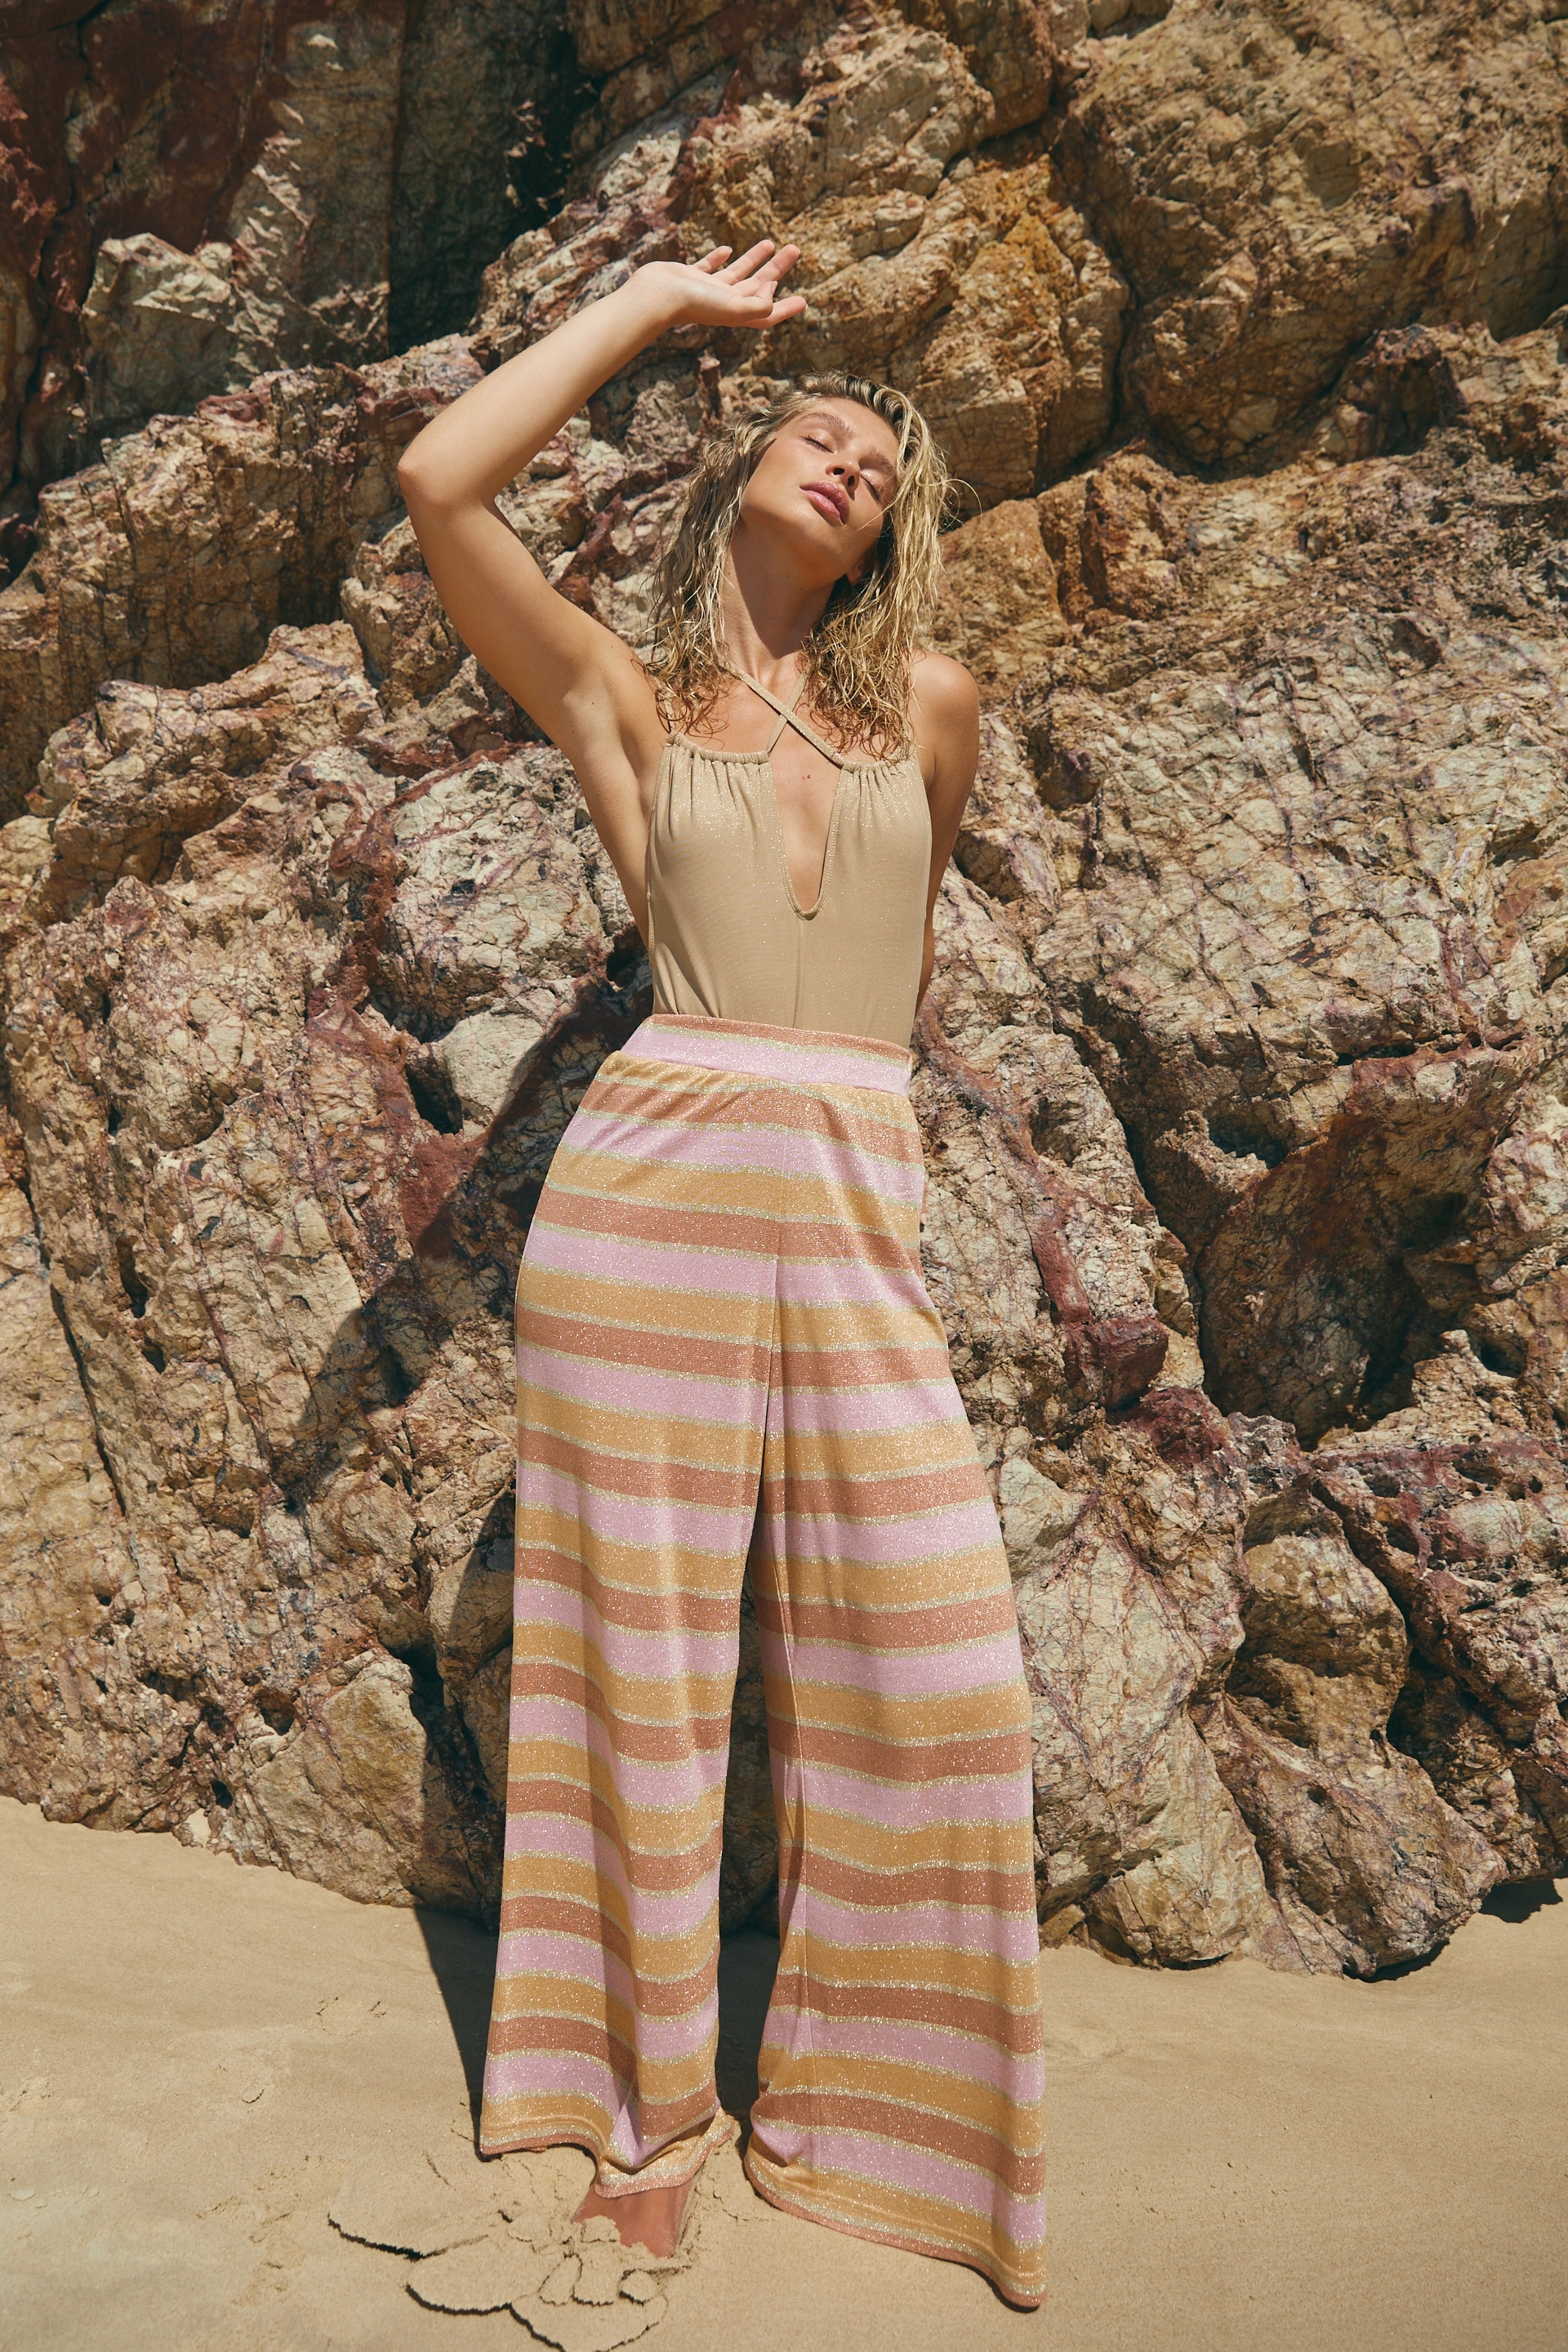 Body - Relaxed Beach Pant - Lilac blossom stripe lurex shimmer